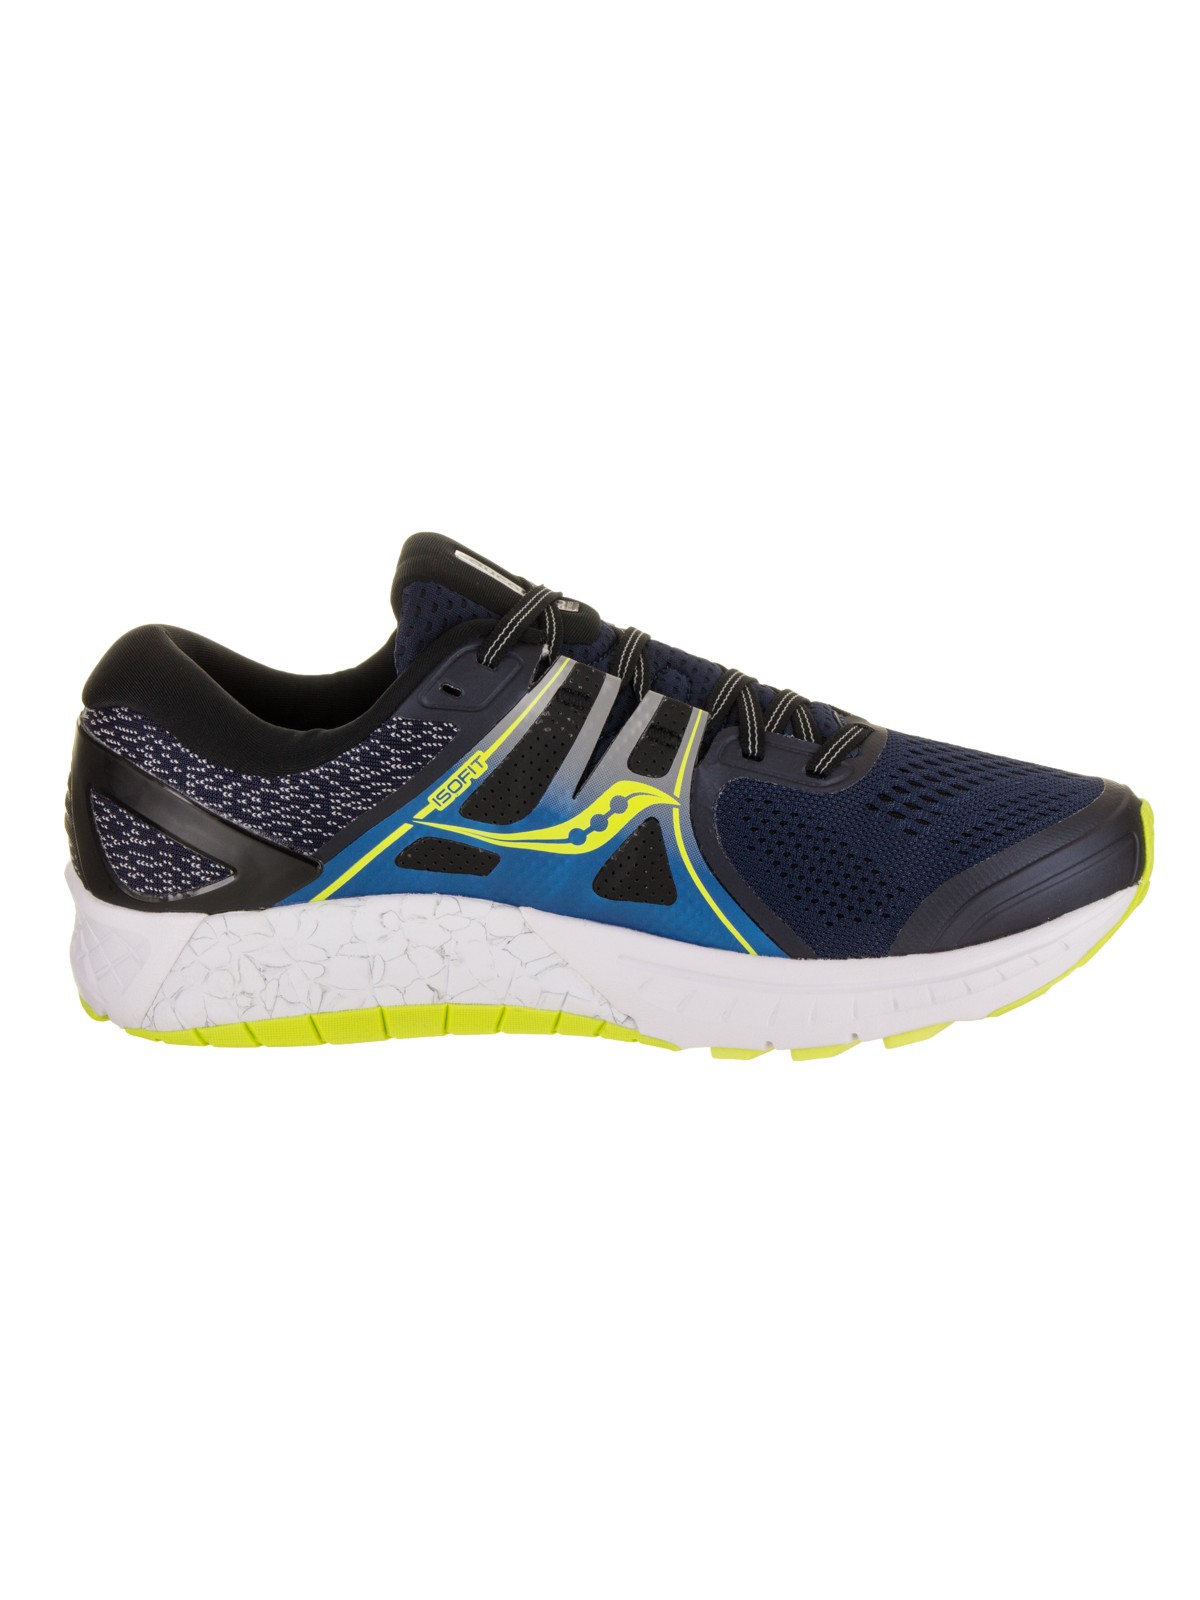 Saucony Mens Omni ISO Road Running Shoe Sneaker - Navy/Blue/Citron - Size 12 - image 2 of 5